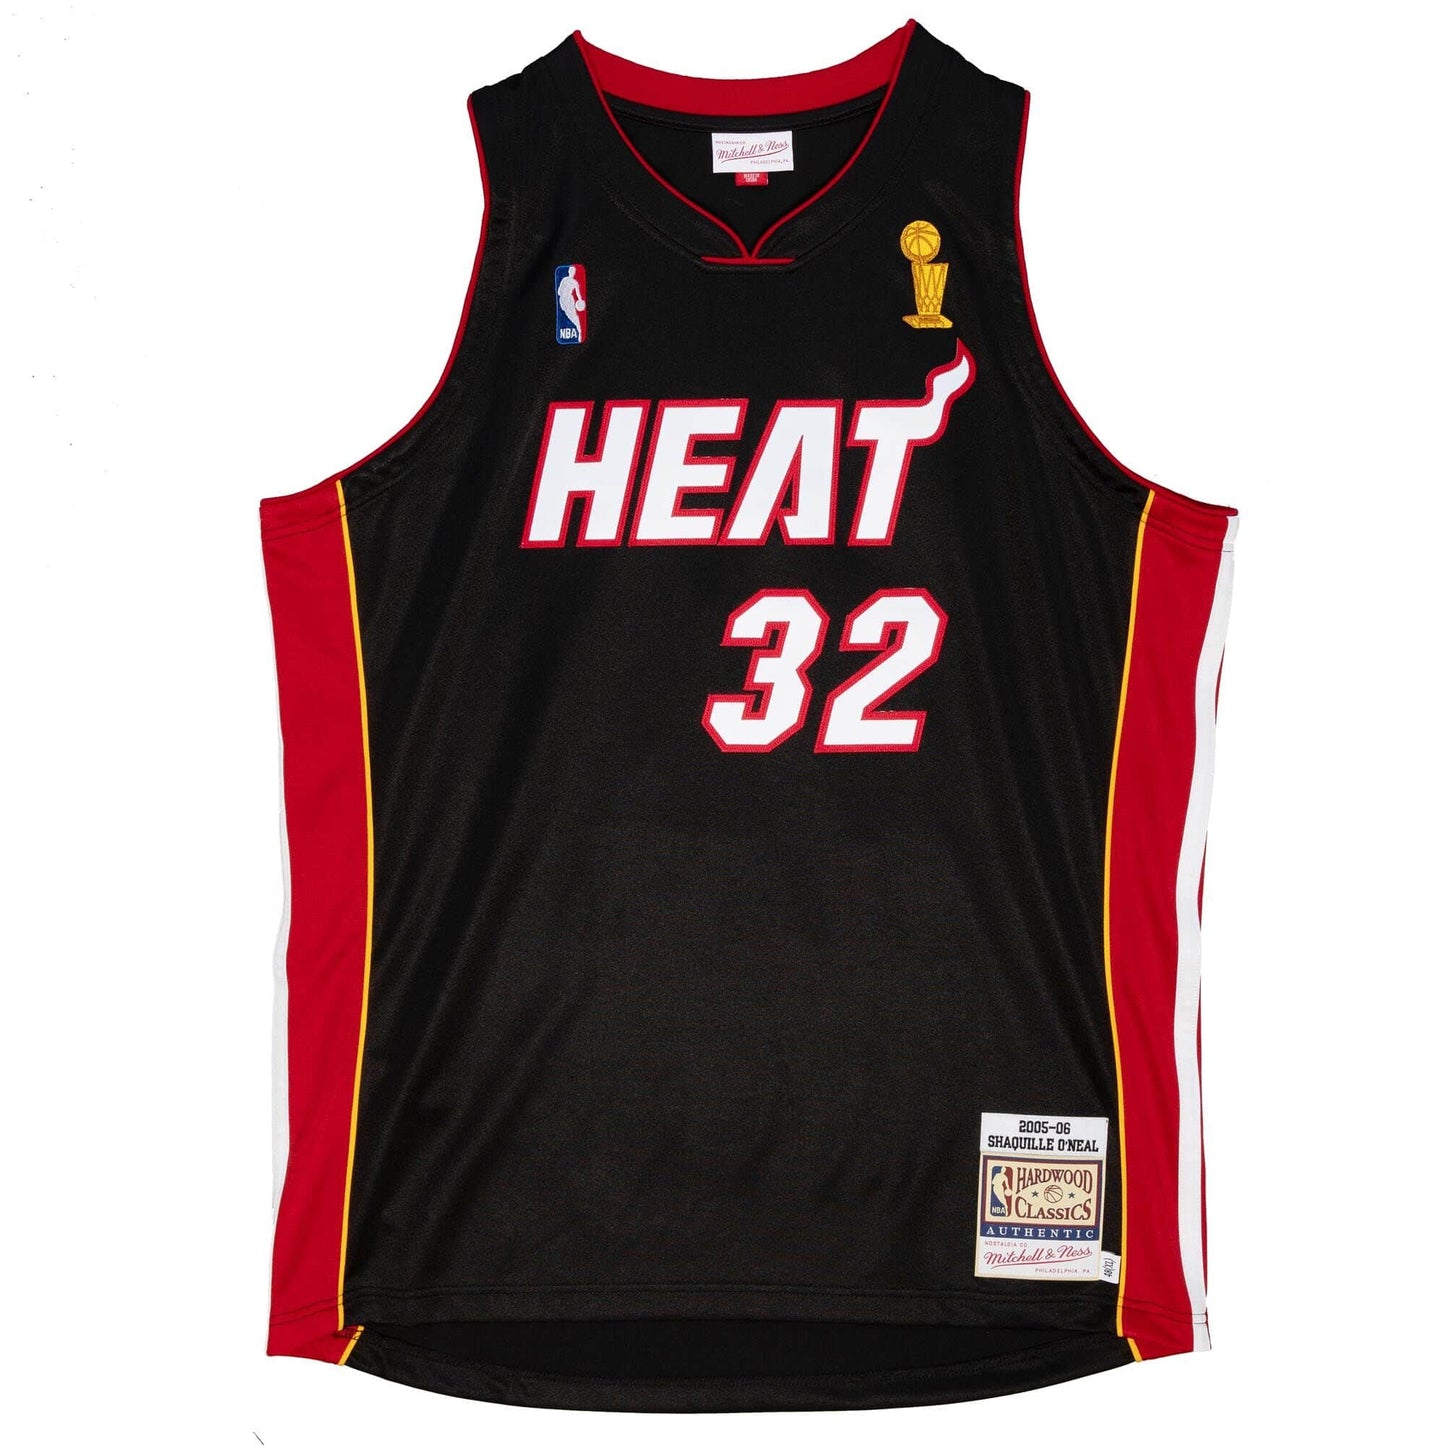 Authentic Shaquille O'Neal Miami Heat Road 2005-06 Jersey